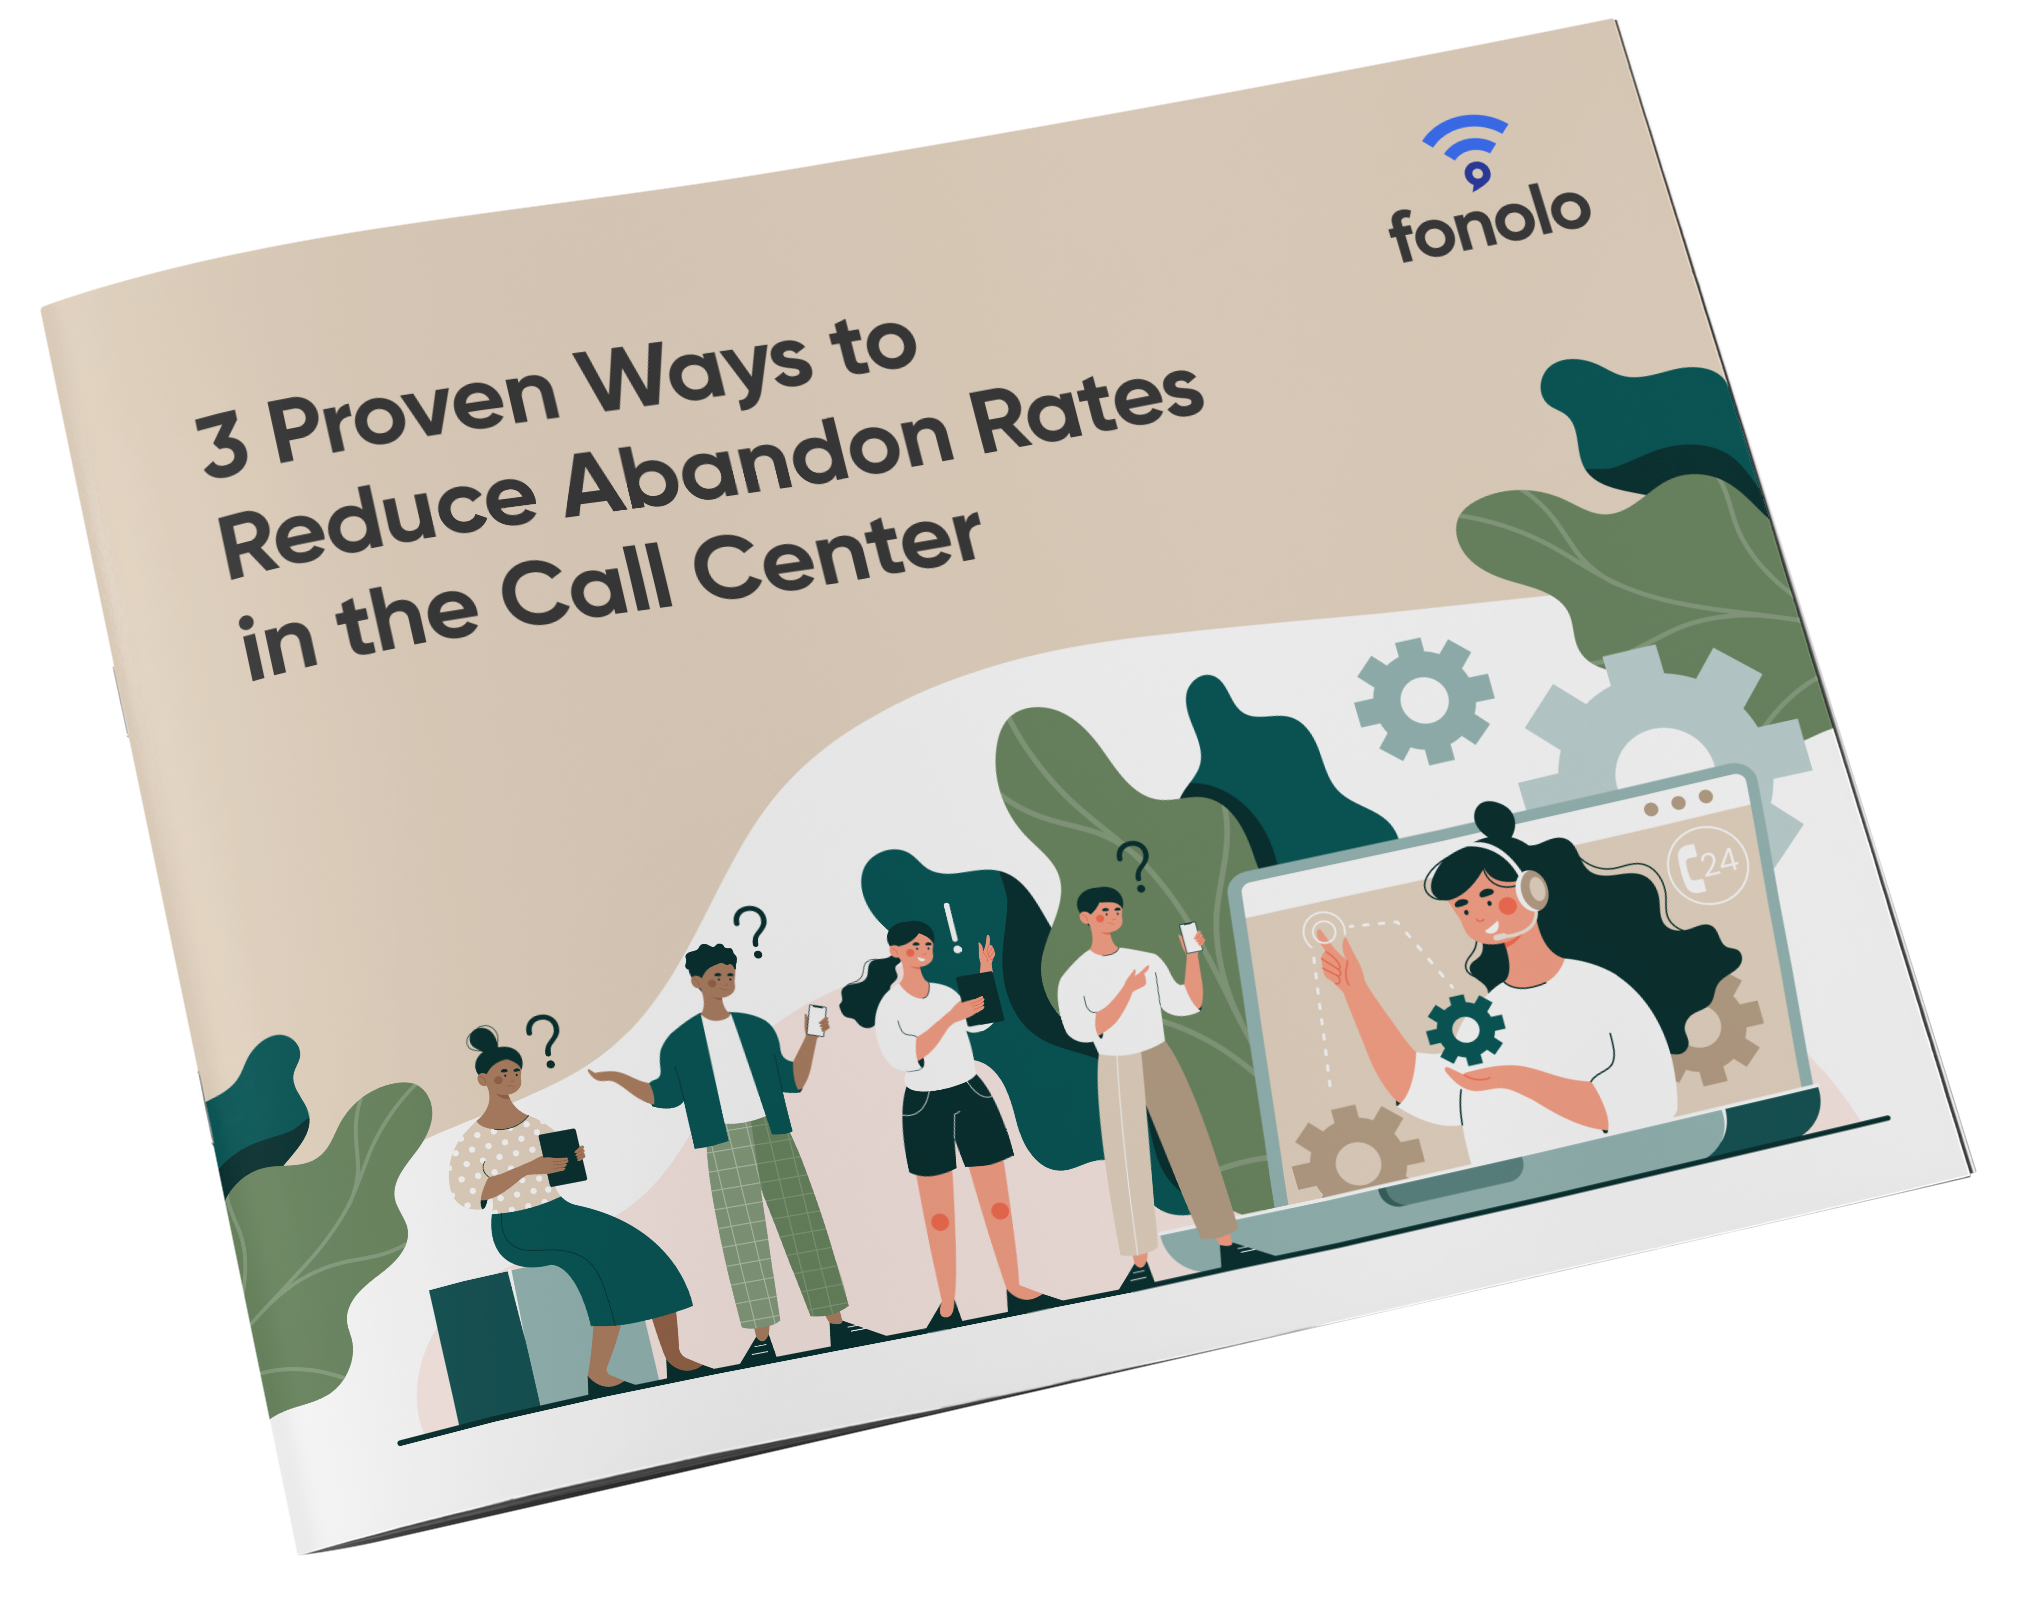 Proven Ways To Reduce Abandon Rates In The Call Center